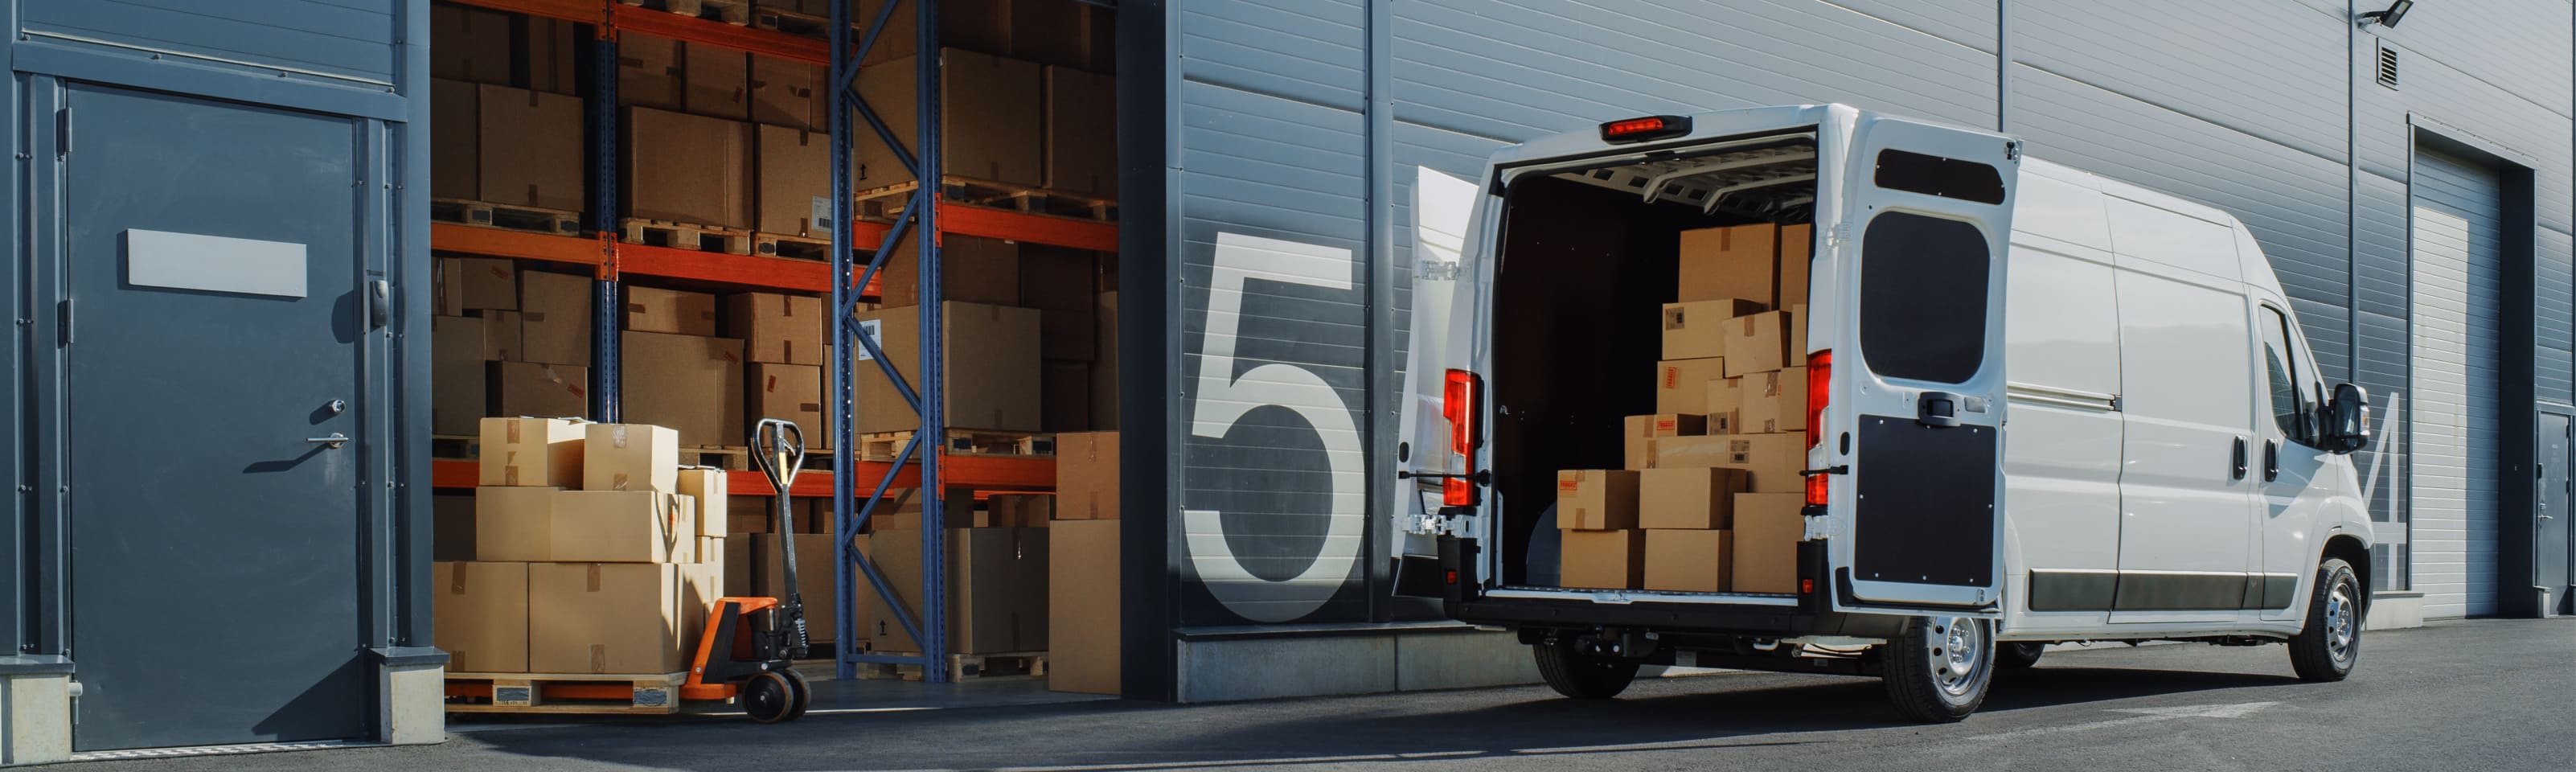 Our picks for the top 3 vans for your transport business